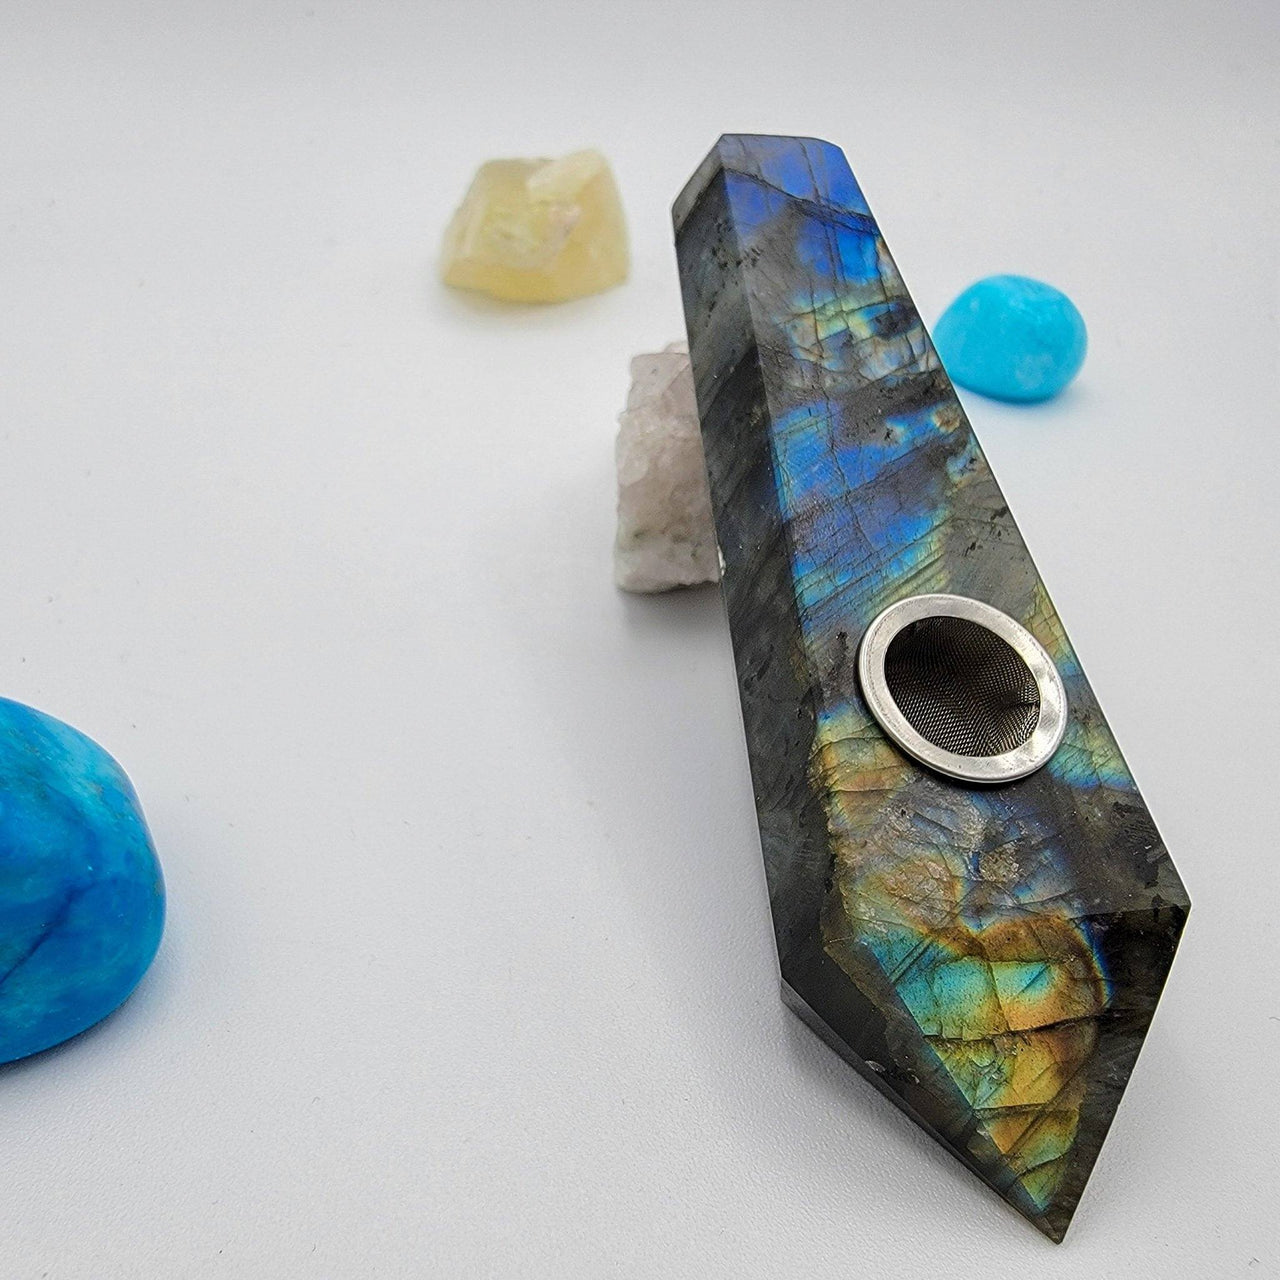 Deep Blue Labradorite Crystal Pipe one of the most popular gemstone pipes, may aid helping opening your crown chakra! A great gift to anyone